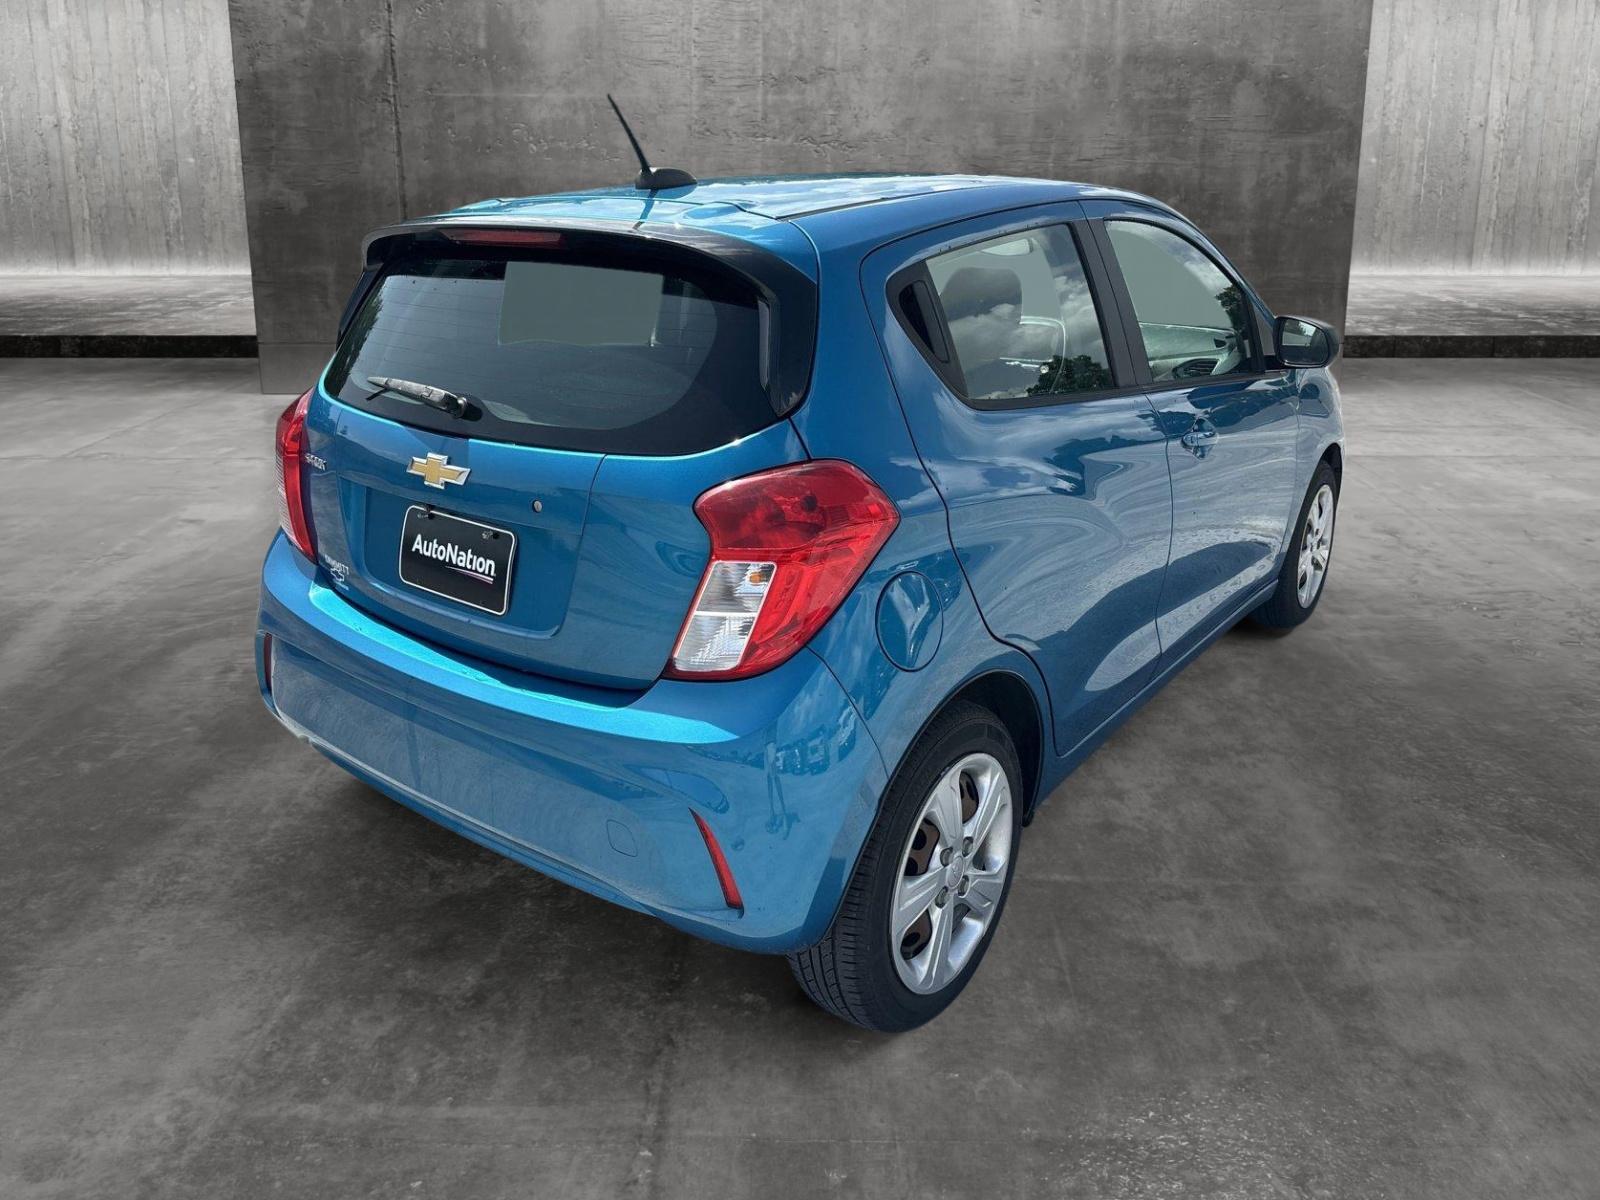 2019 Chevrolet Spark Vehicle Photo in Clearwater, FL 33765